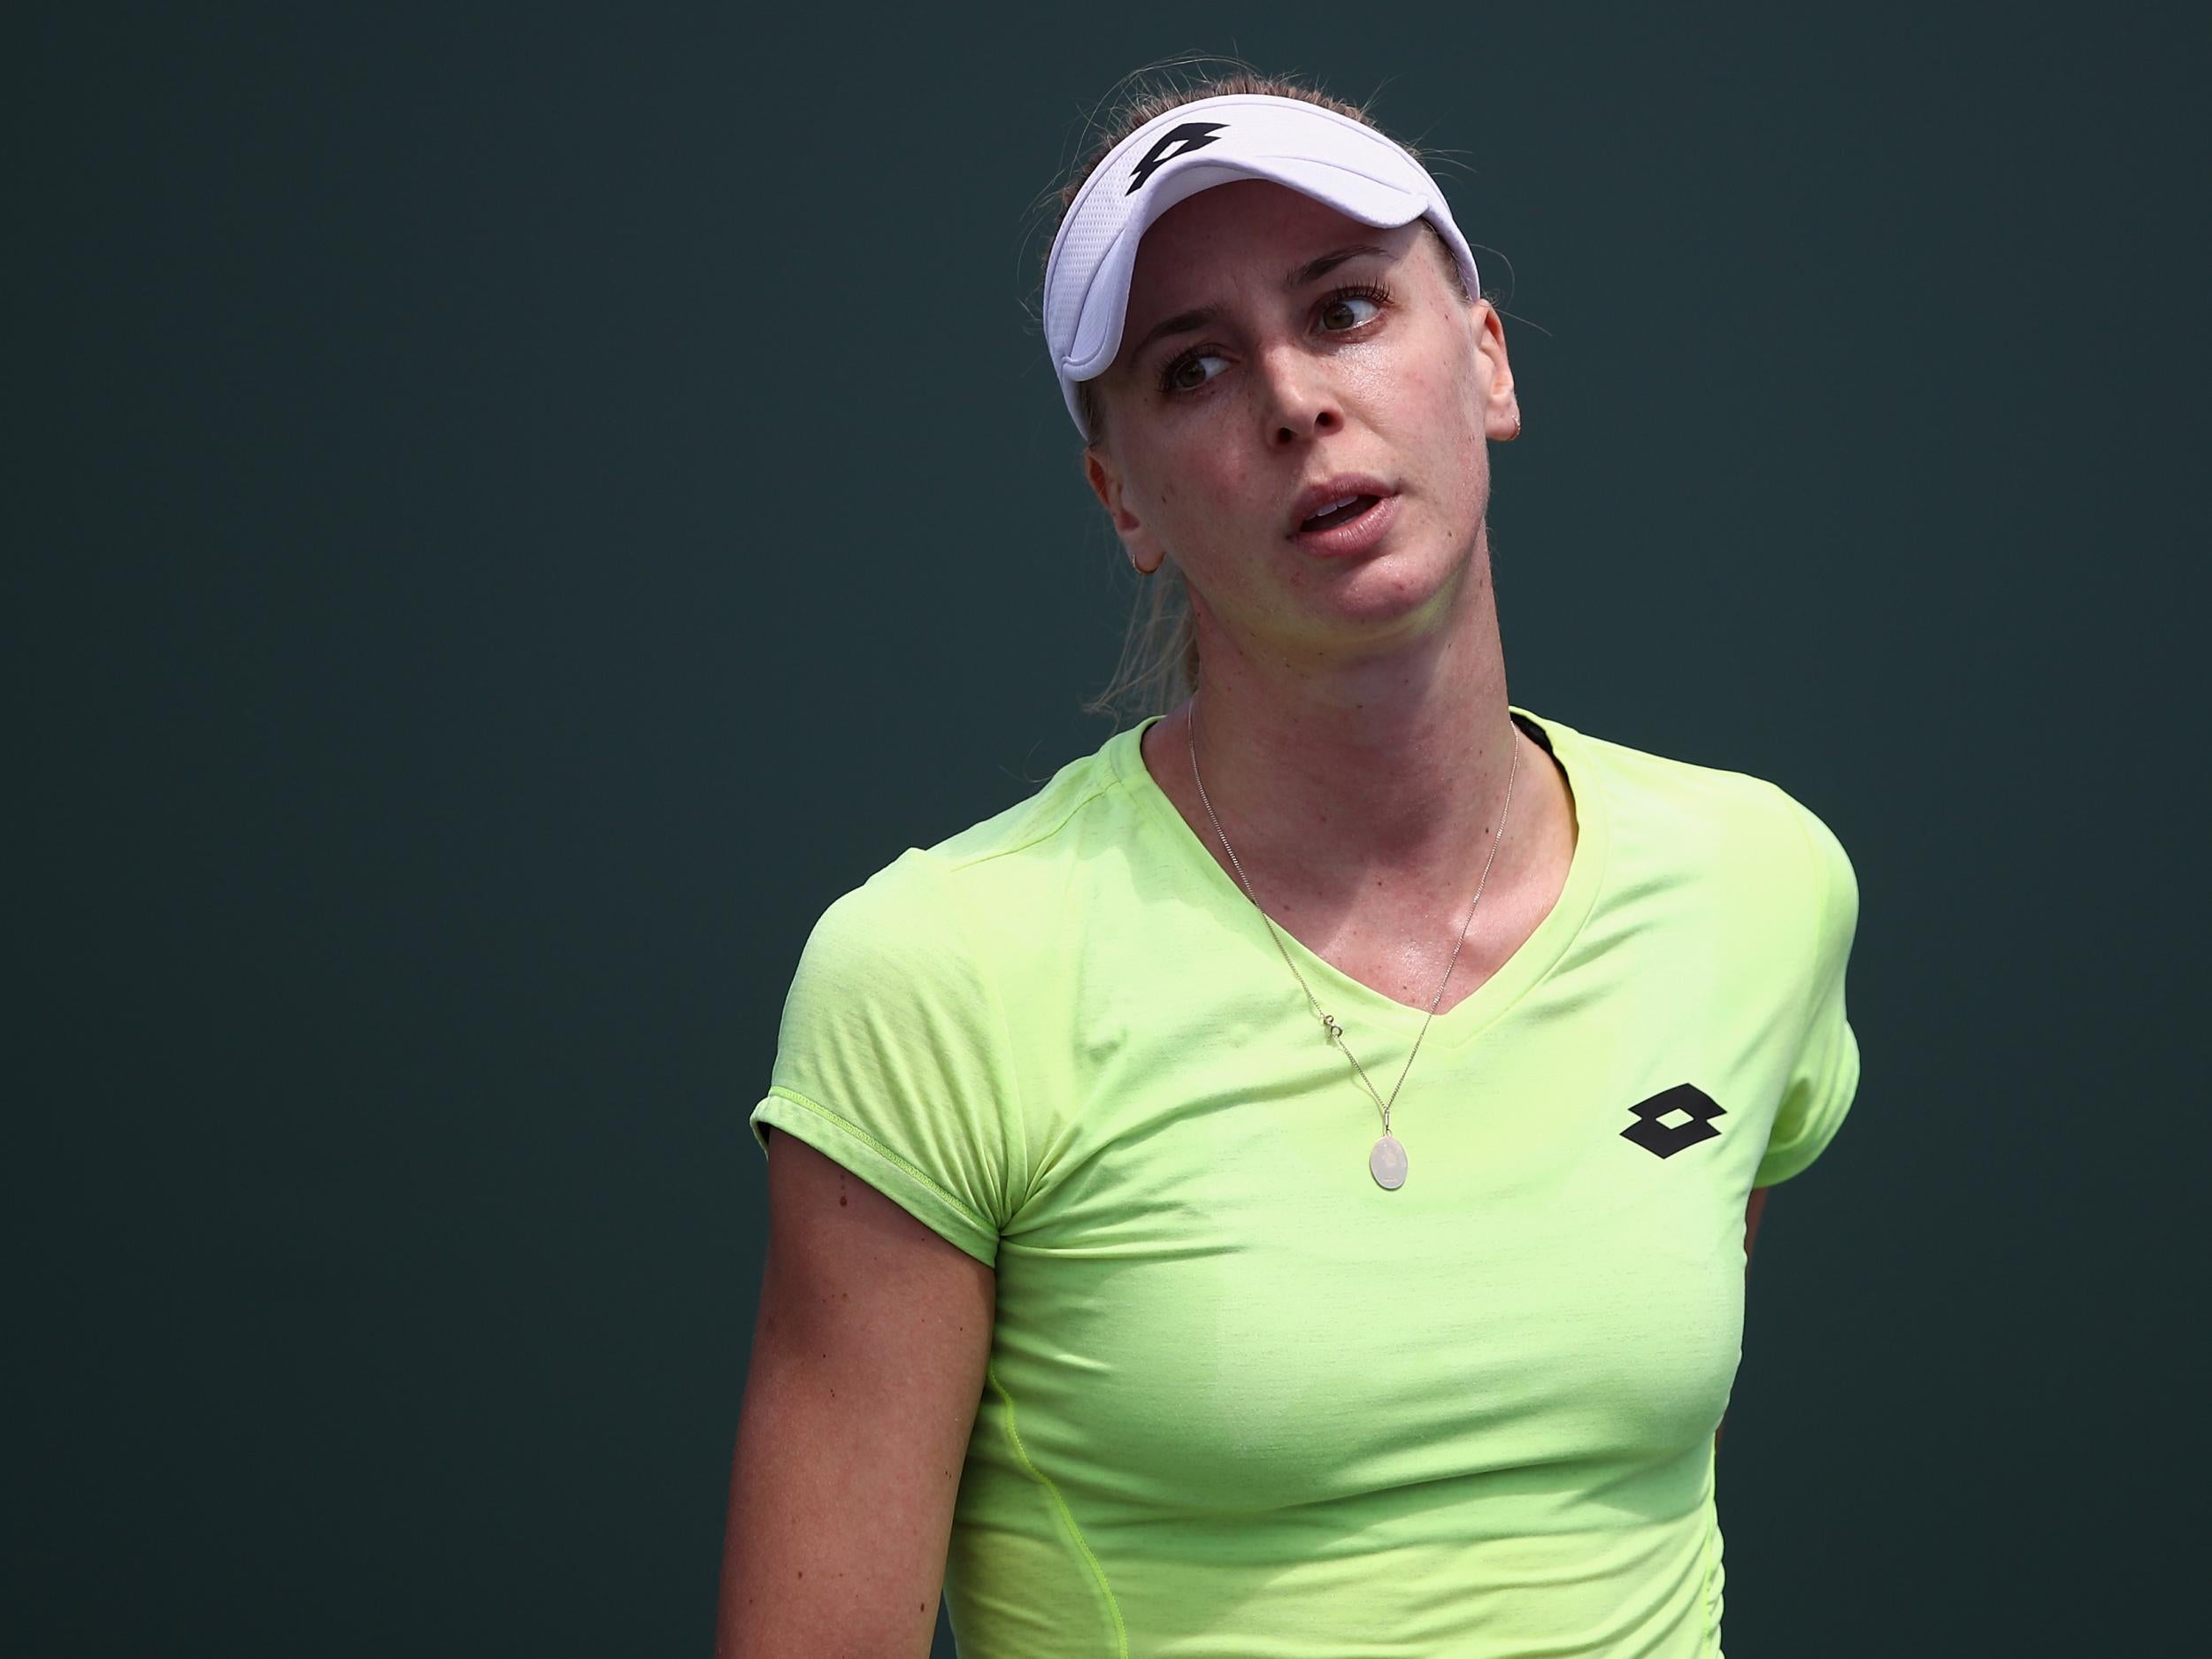 Broady slipped to a straight sets defeat against the Hungarian